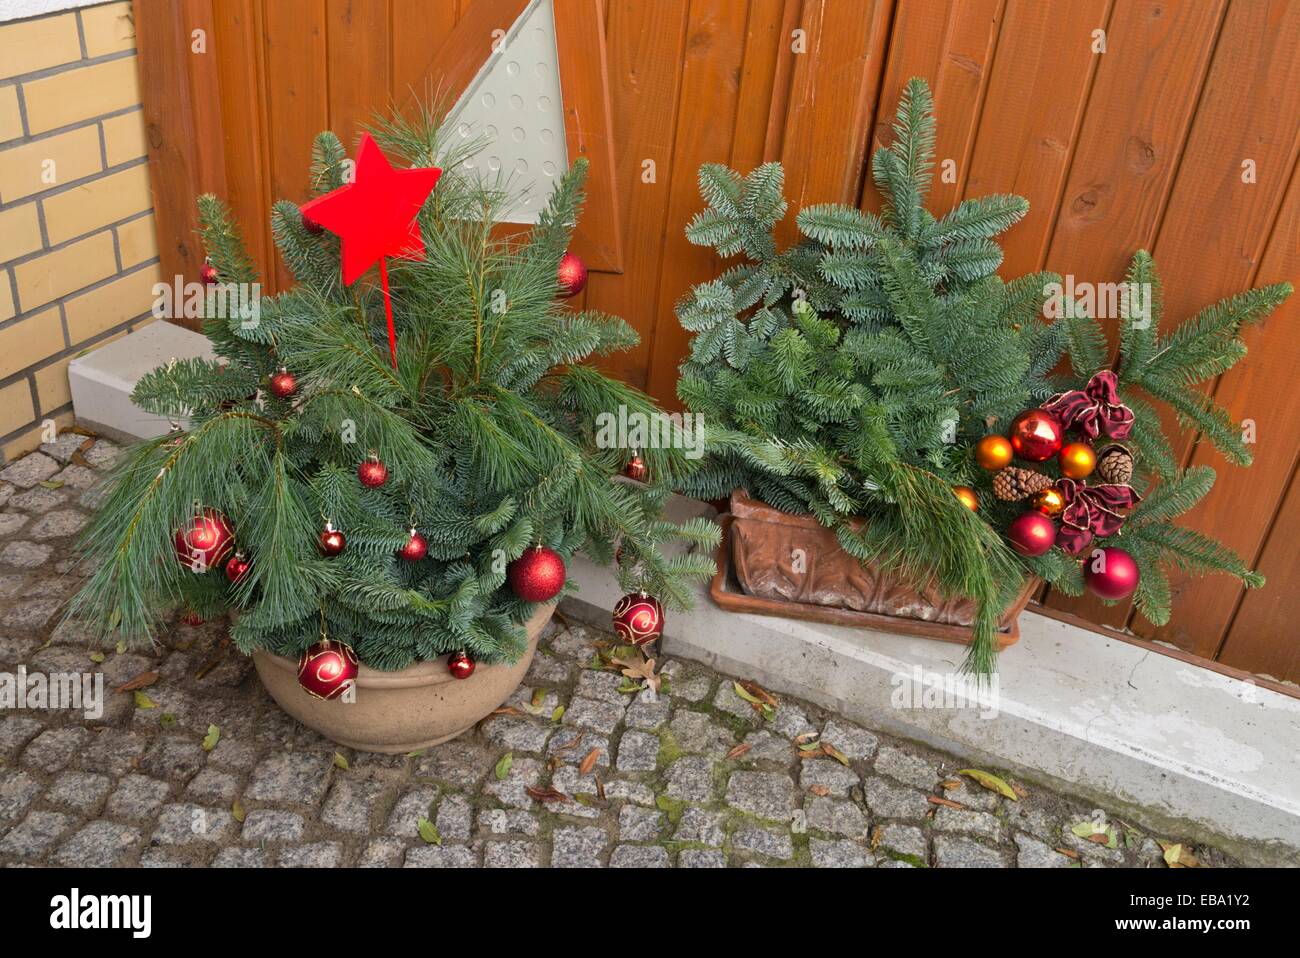 Christmas arrangement with twigs and Christmas tree baubles Stock Photo